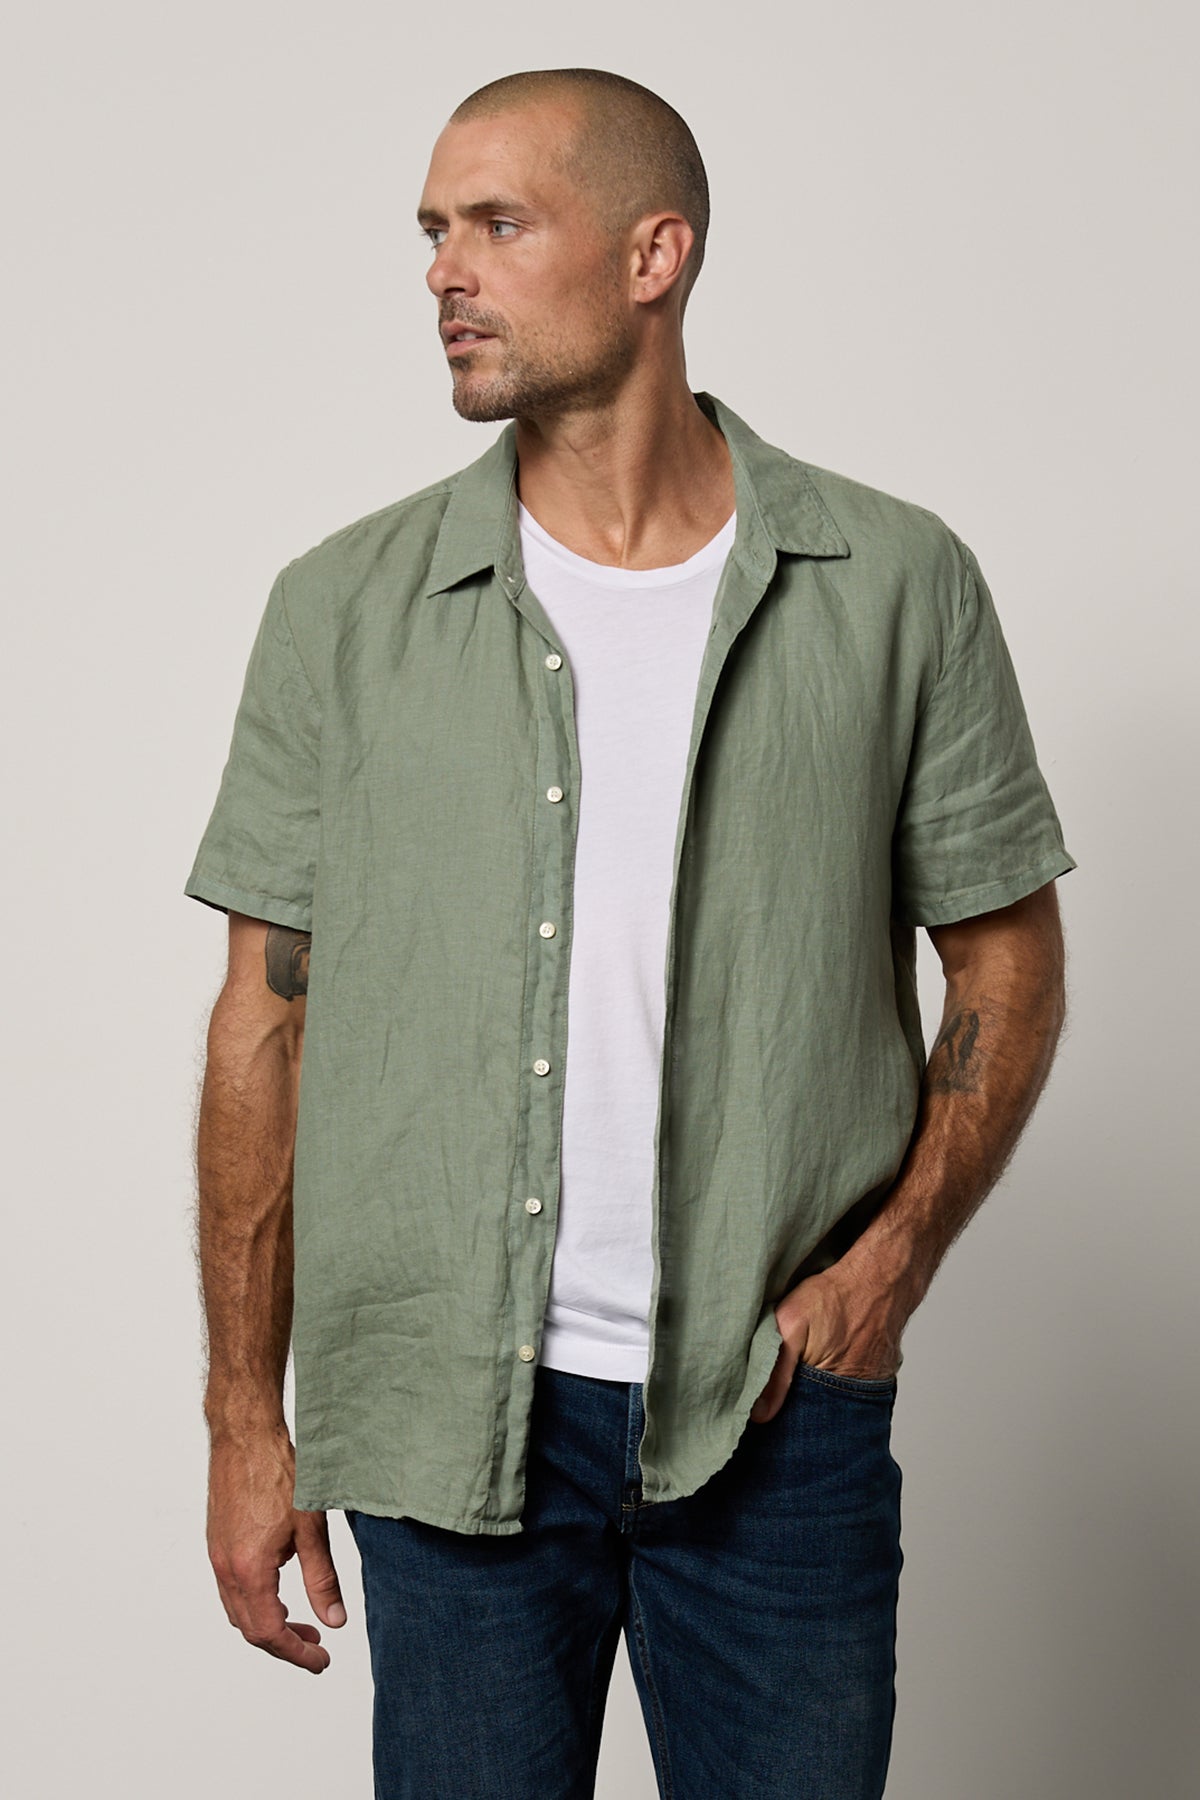 Mackie Button-Up Shirt in cactus soft green unbuttoned over white Howard Tee with dark blue denim front-26438238765249